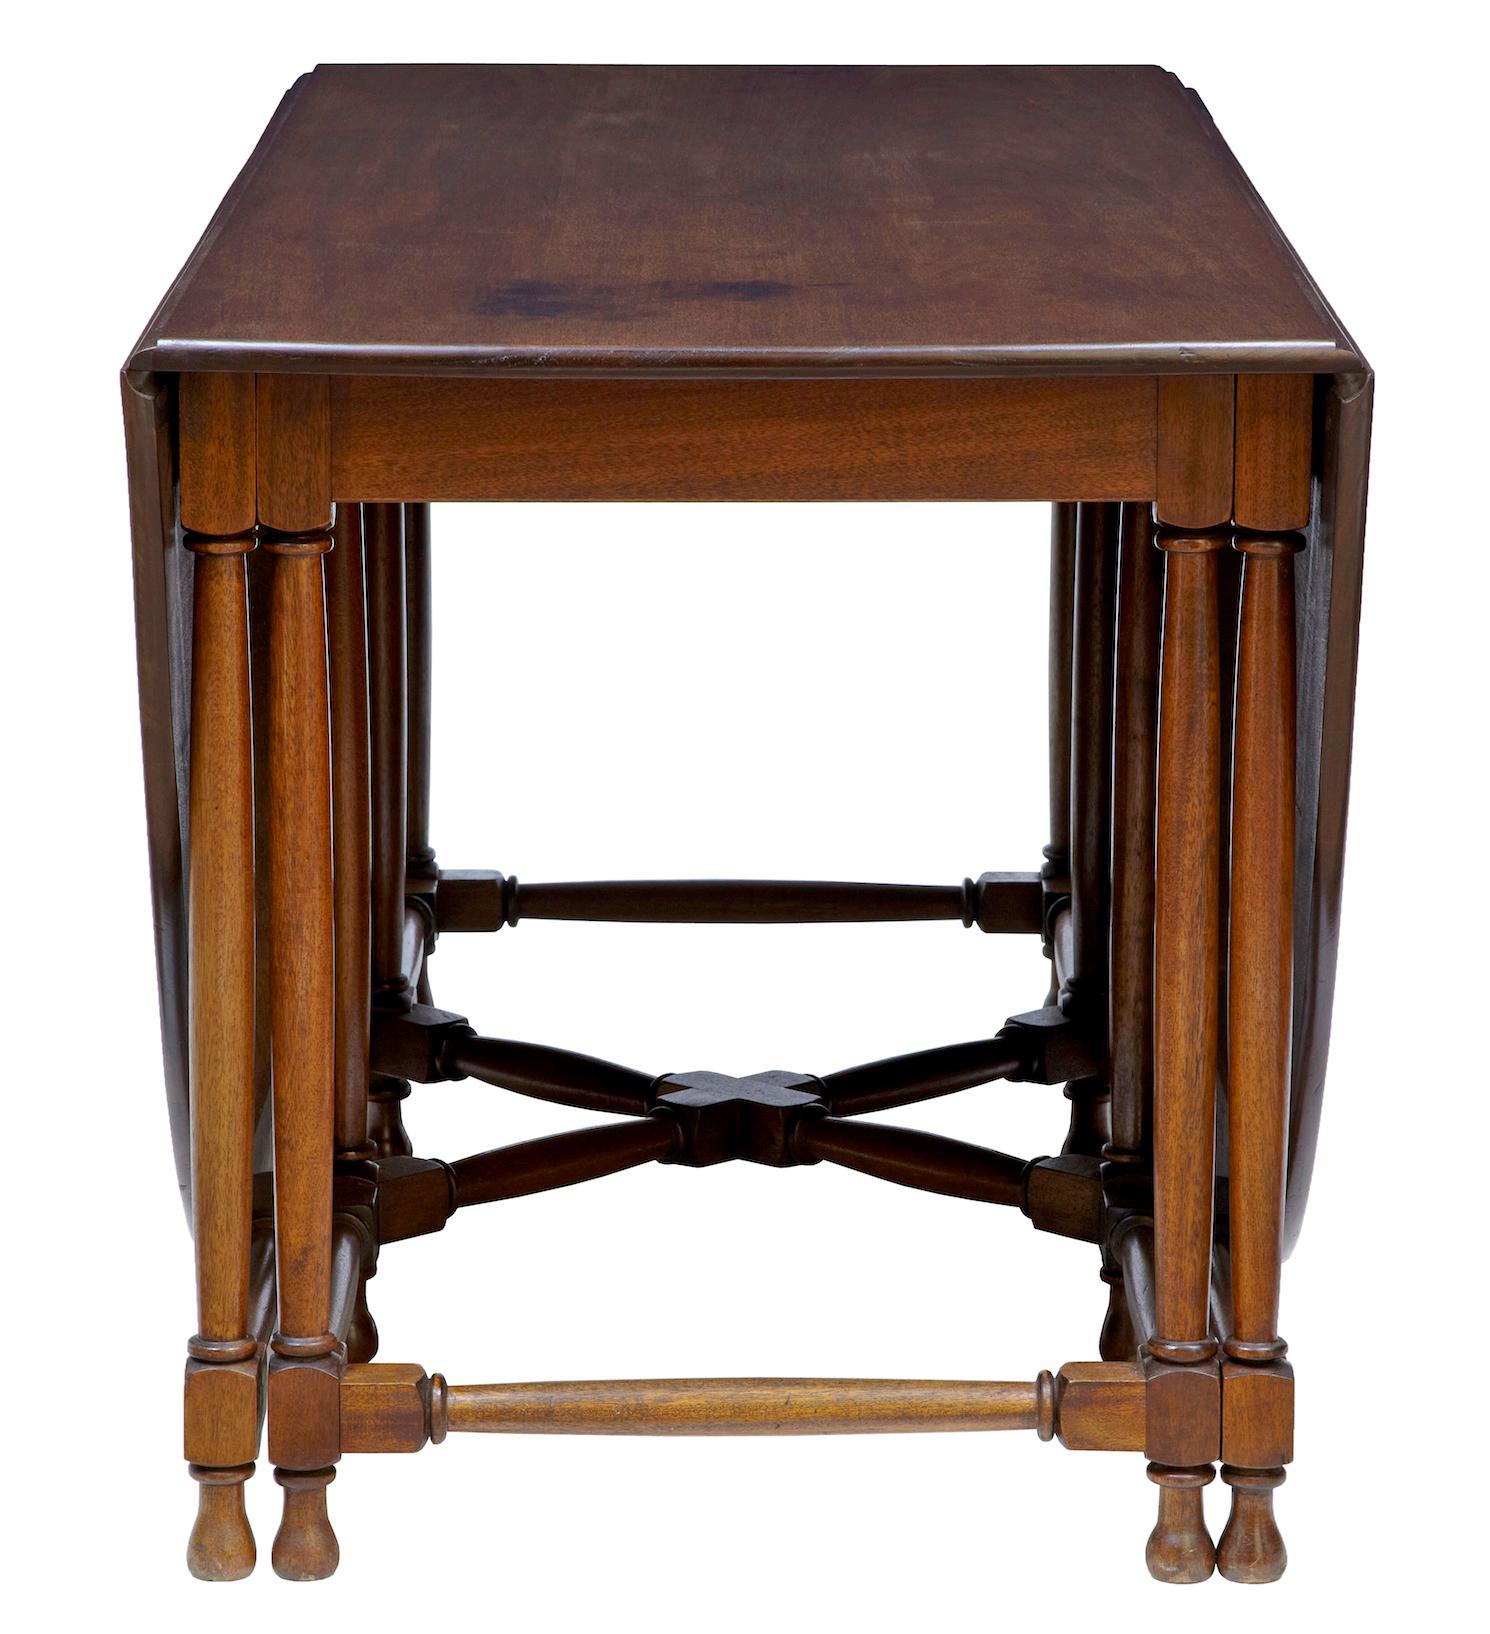 Here we have a gateleg table a little different from the normal with strong Chippendale influence to the base.

Drop down leaves open to provide seating for a good 10 people.

Made from good quality mahogany. Some surface staining to top, which